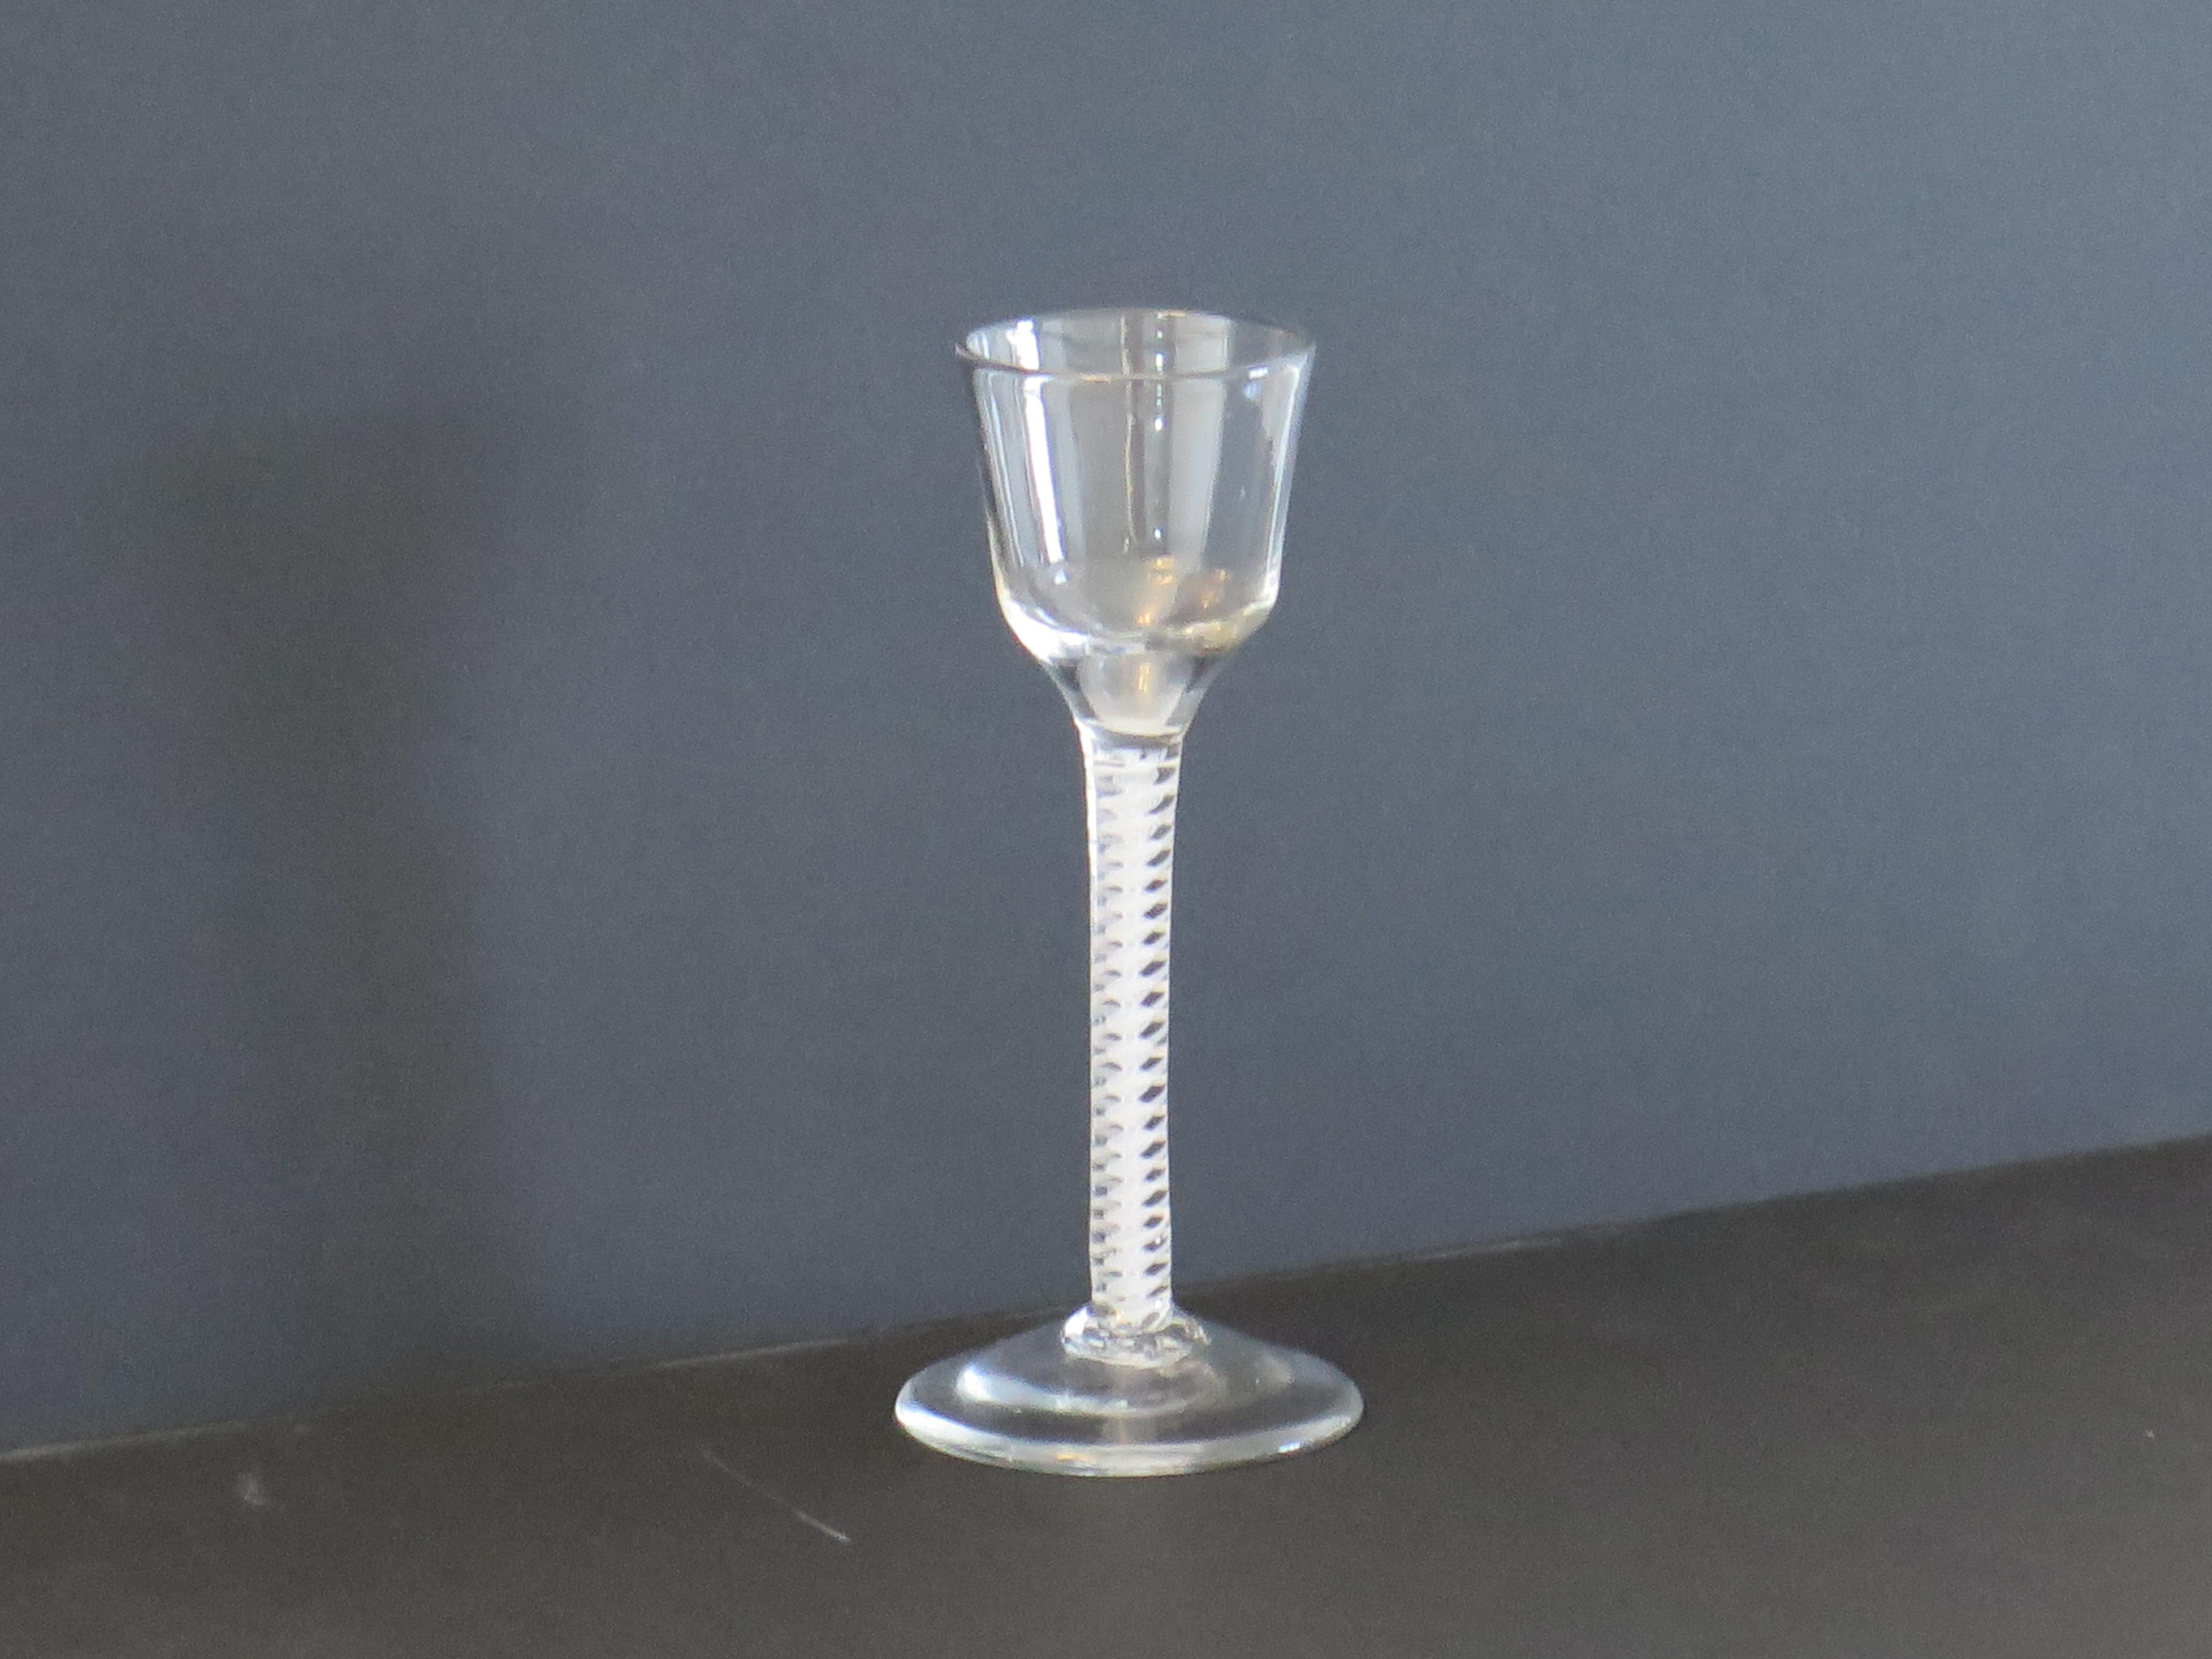 This is a good hand blown, English, mid-Georgian, Cordial drinking glass with a double series opaque twist (DSOT) stem, dating from the middle of the 18th century, circa 1765.

These handblown Georgian wine glasses are very collectable,  made from